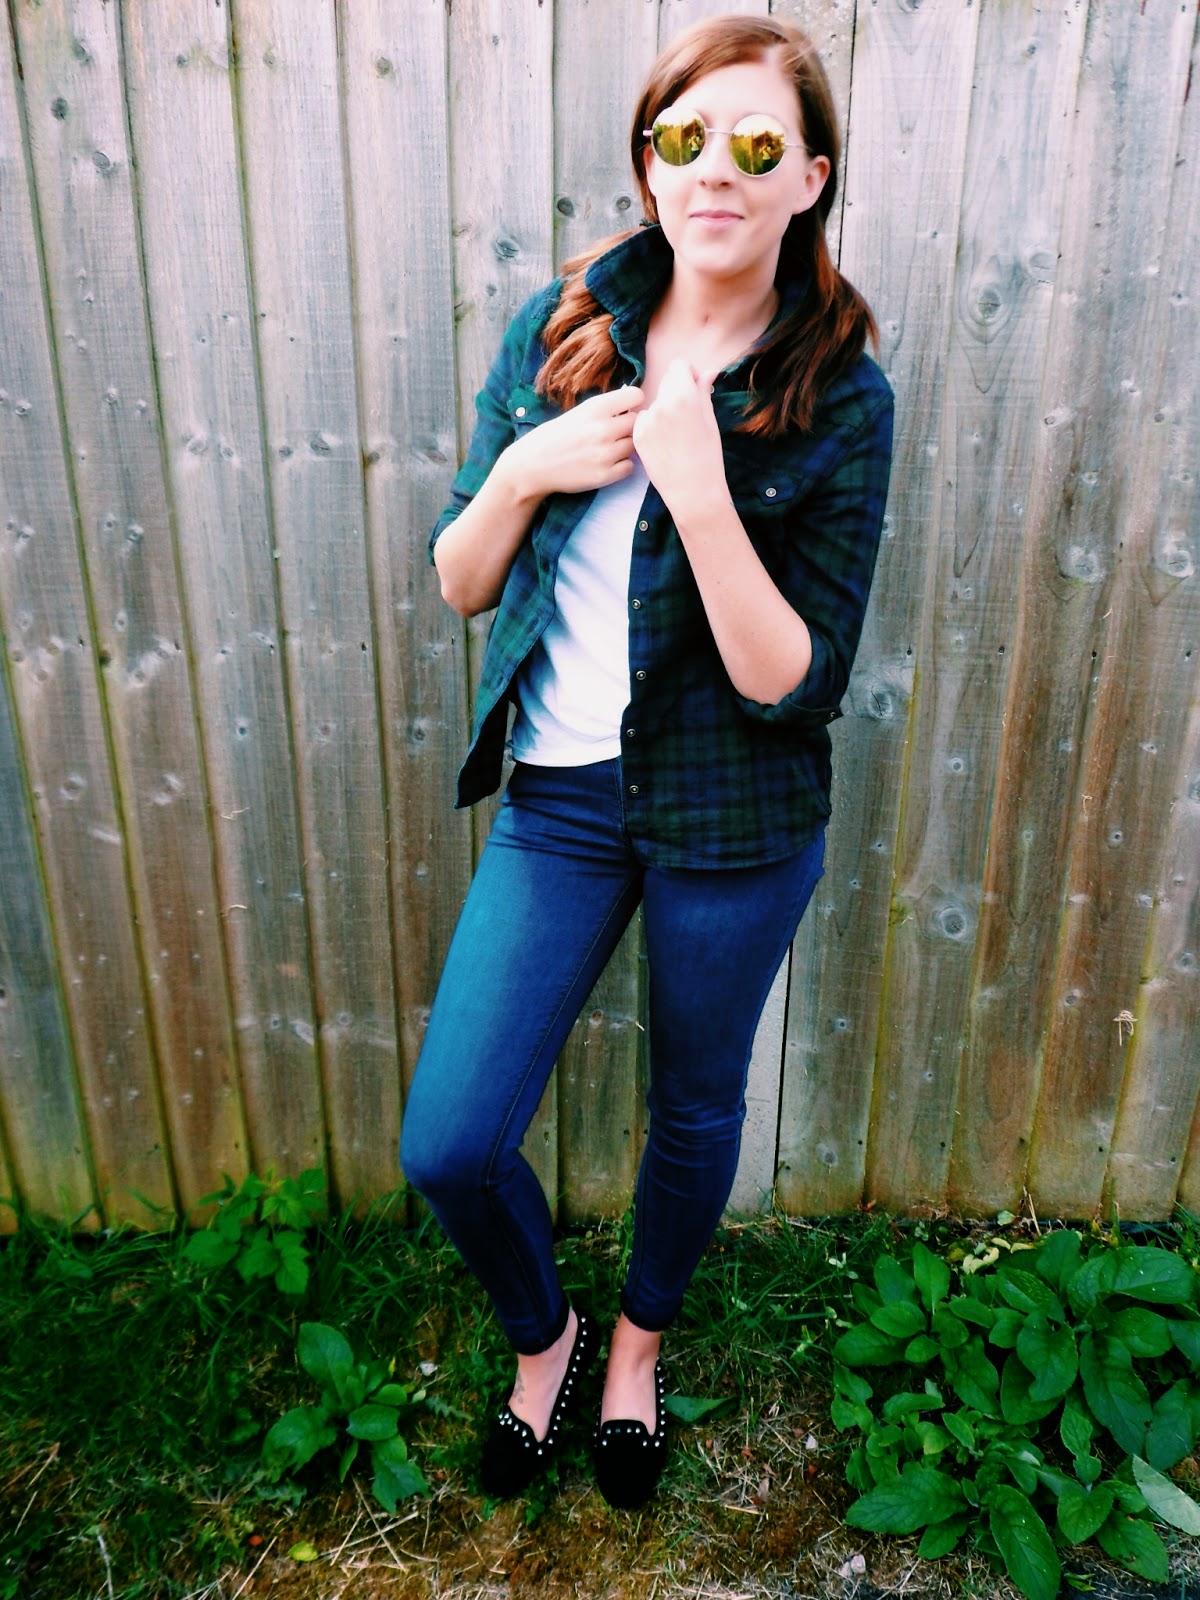 fashionbloggers, fbloggers, ootd, outfitoftheday, primark, whatibought, whatimwearing, wiw, flannelshirt, whitetop, retro, vintage